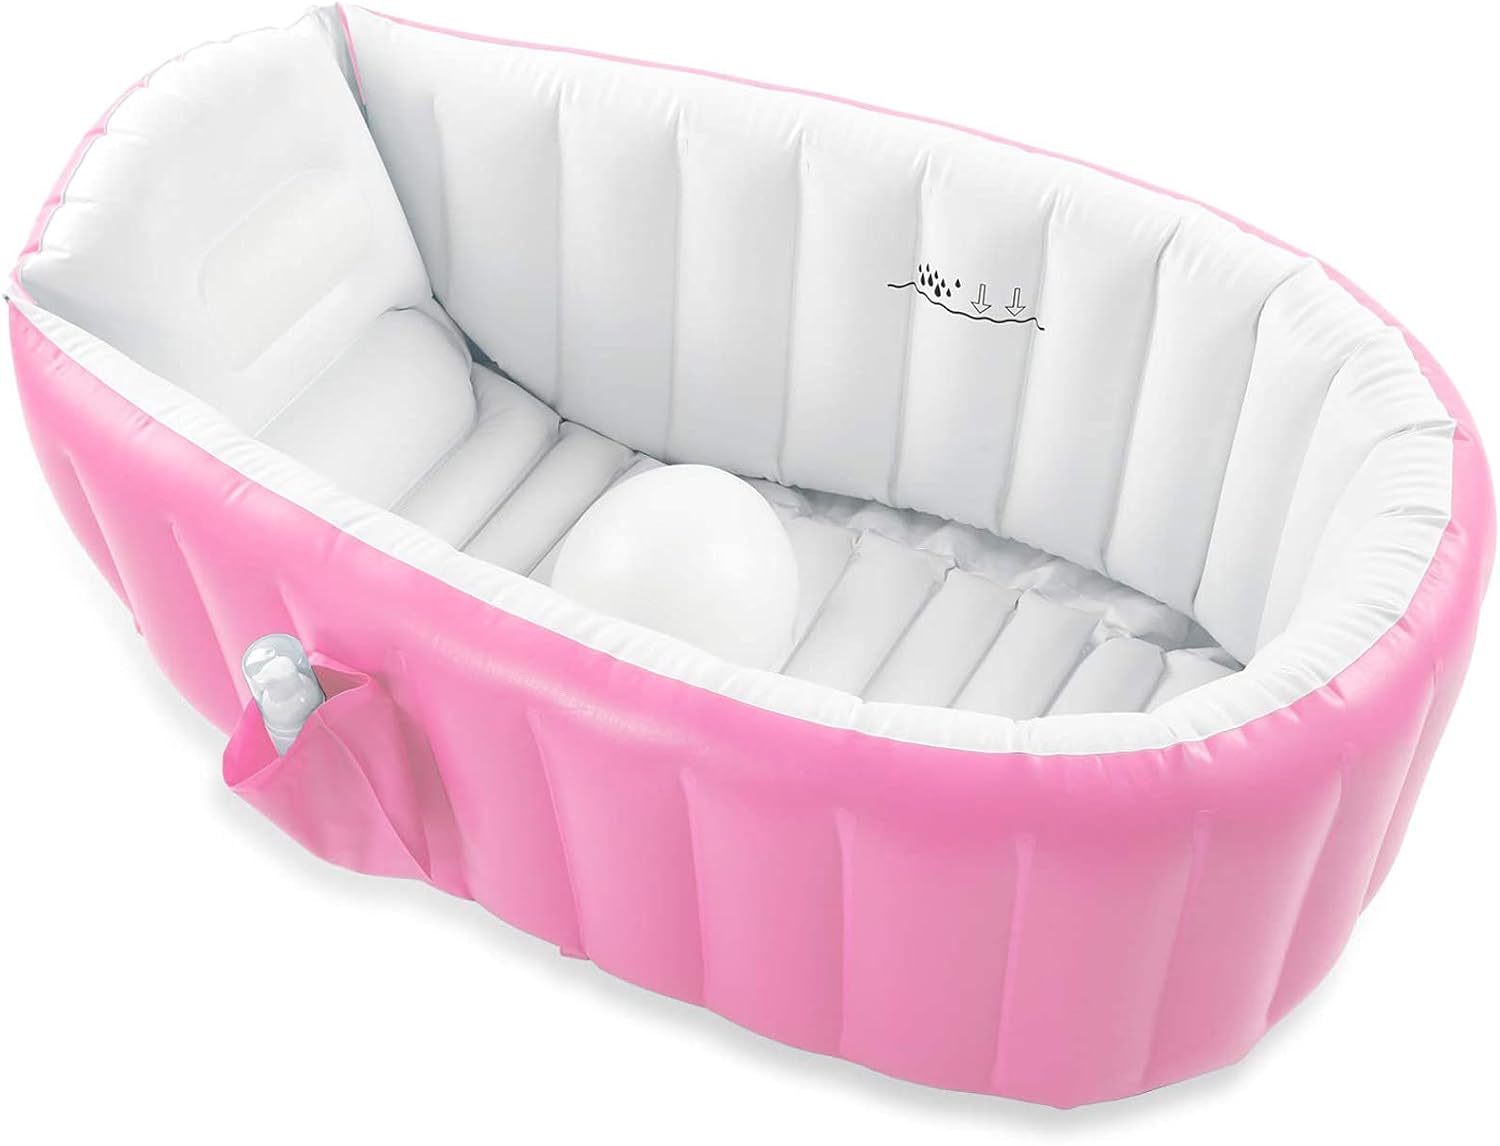 UUHOME Baby Inflatable Bathtub, Portable Infant Toddler Bathing Tub Non Slip Travel Bathtub Mini Air Swimming Pool Kids Thick Foldable Shower Basin with Air Pump (Pink)